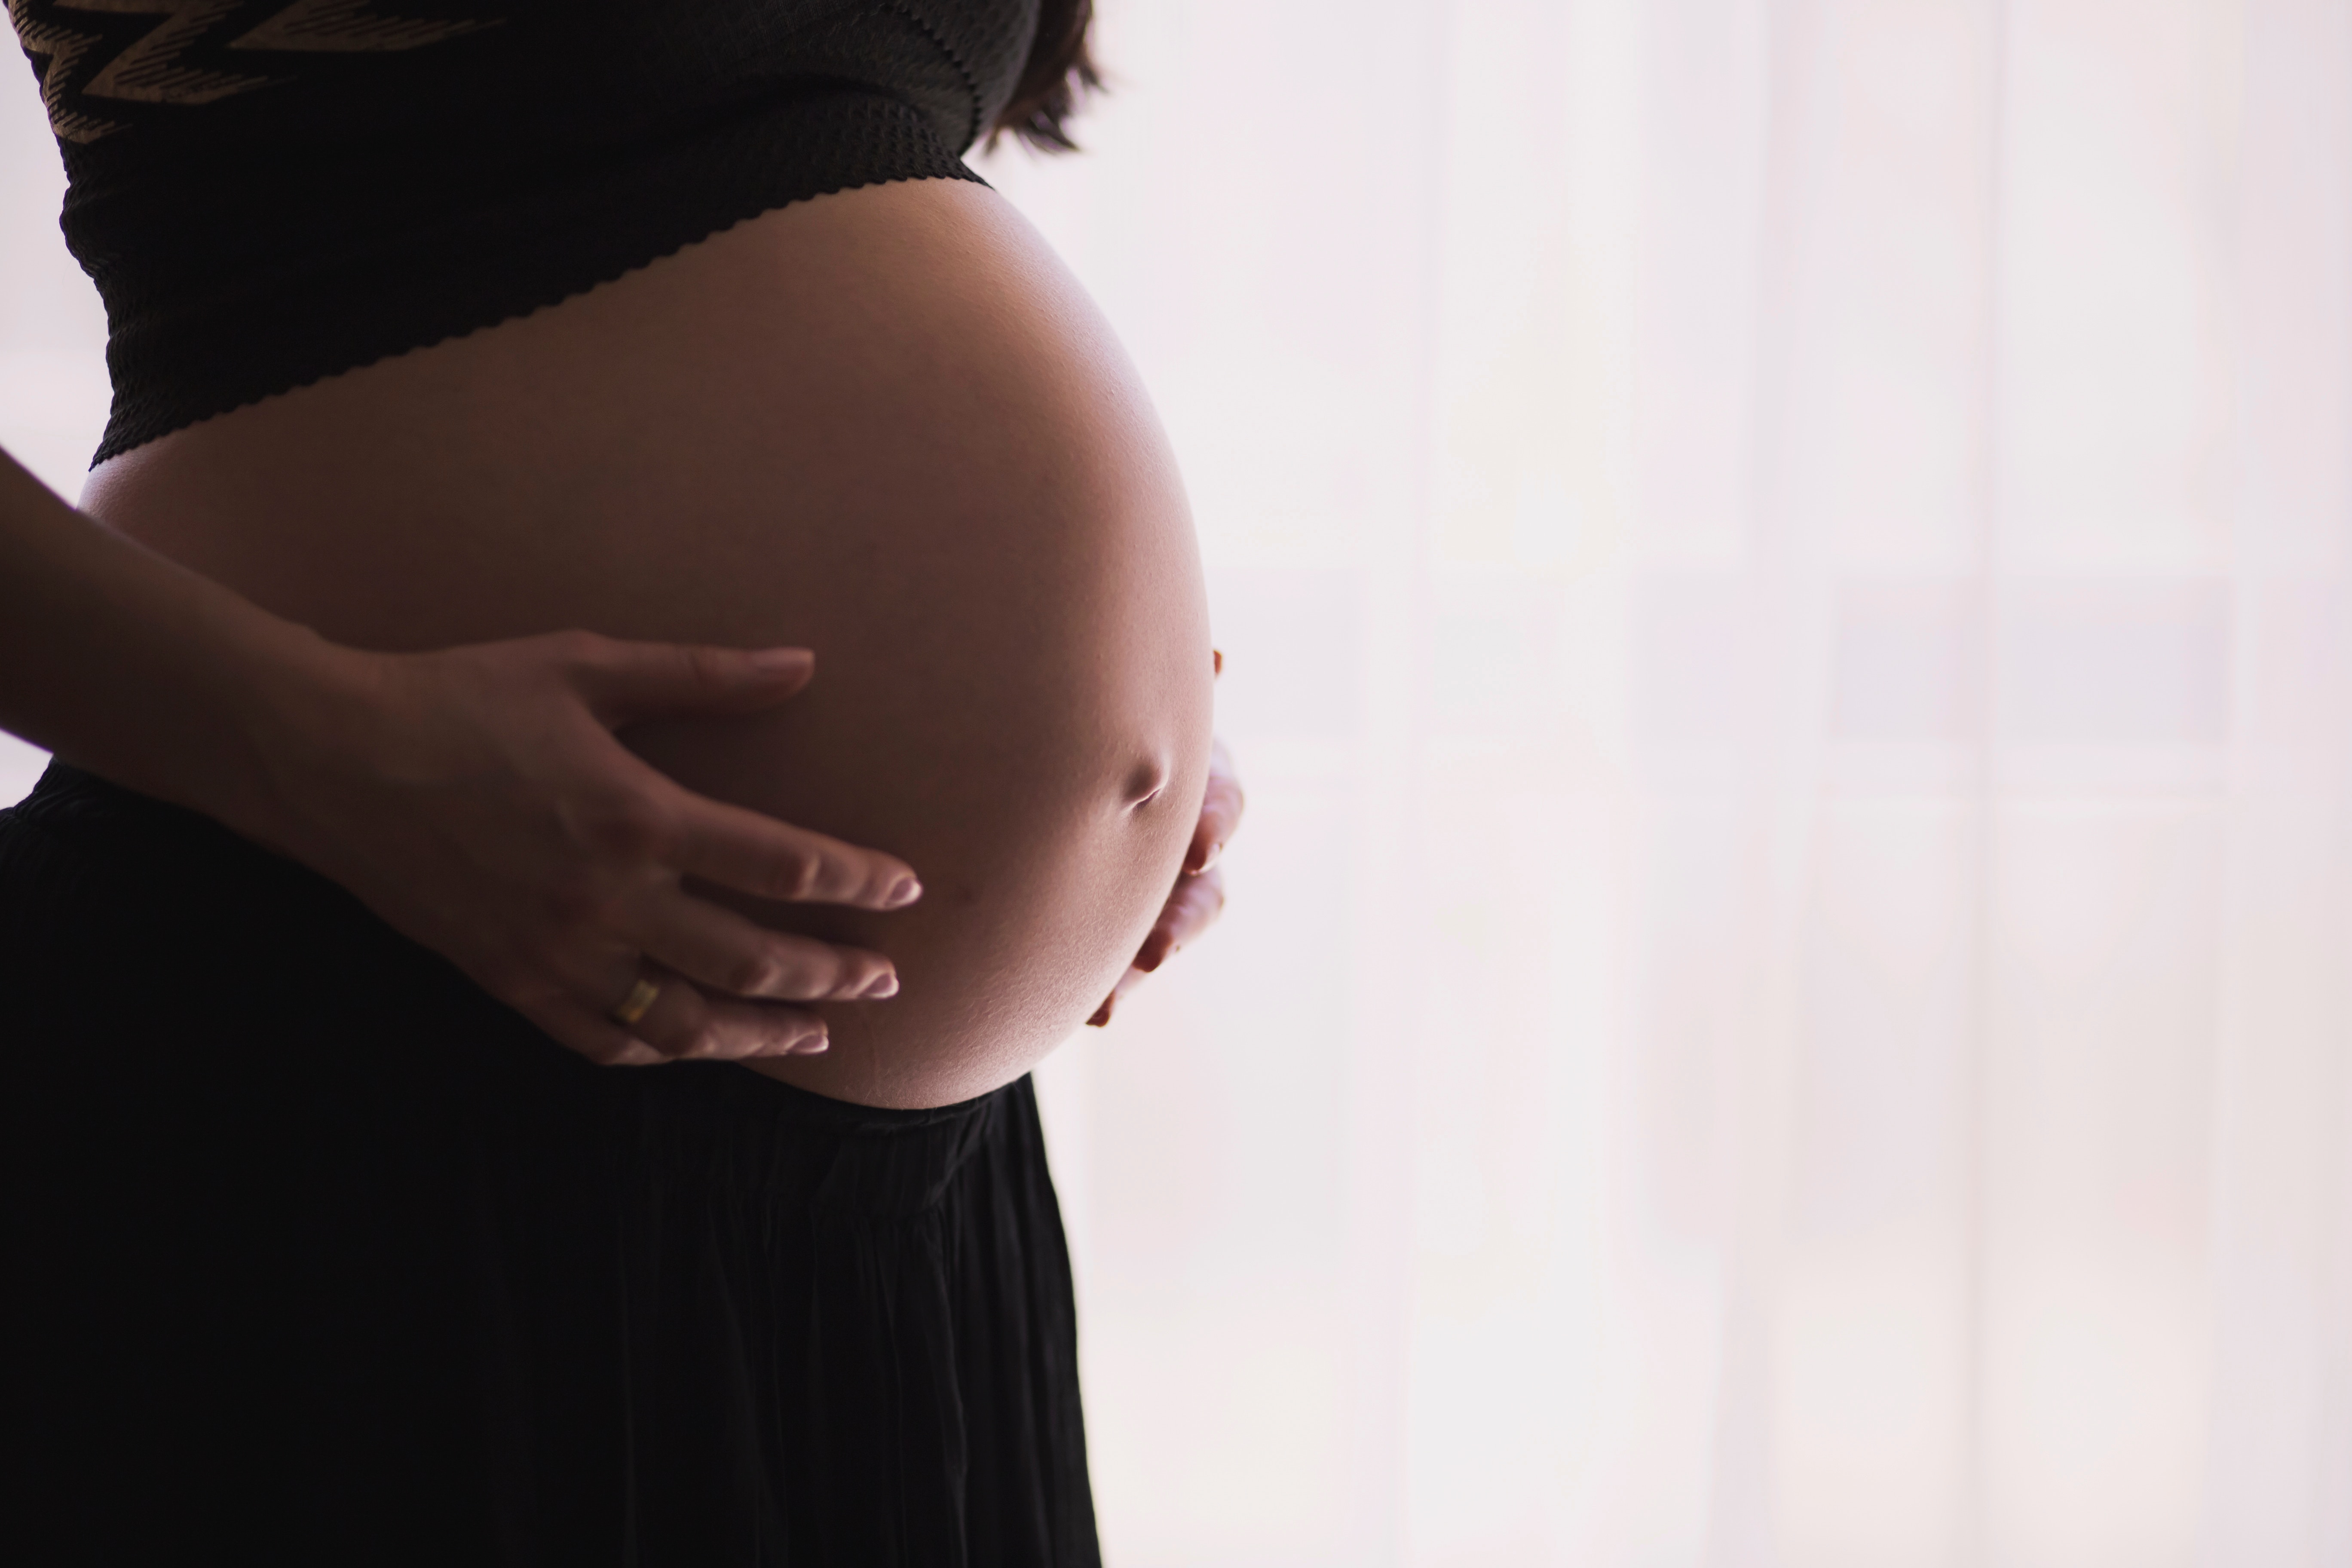 Cesarean Delivery Linked to Increased Risk of Severe Maternal Complications